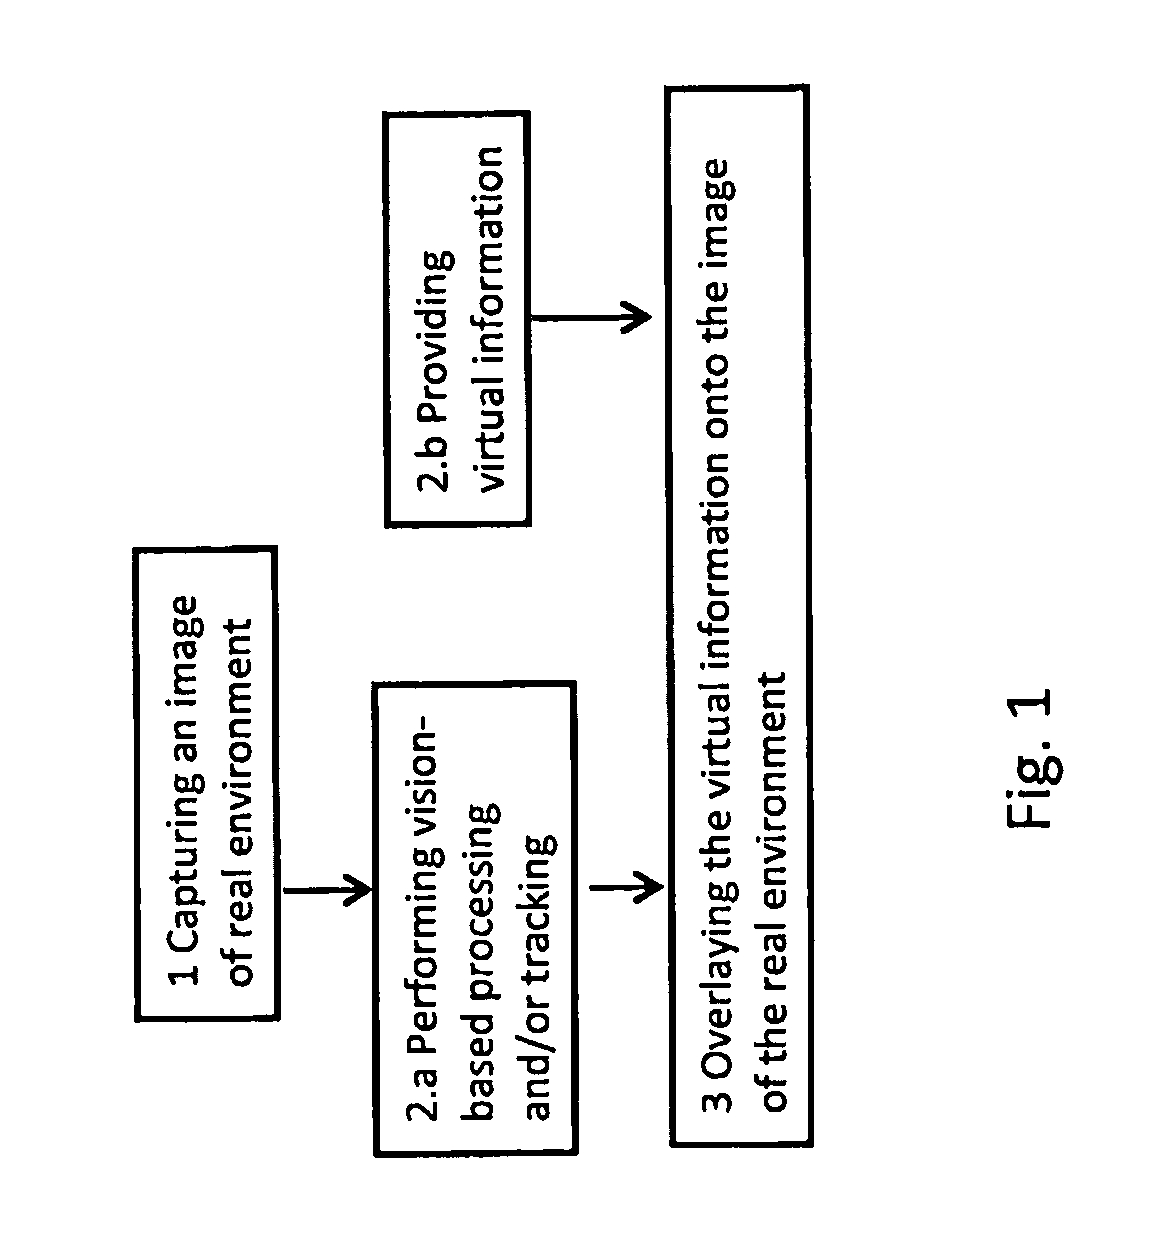 Method of image processing for an augmented reality application